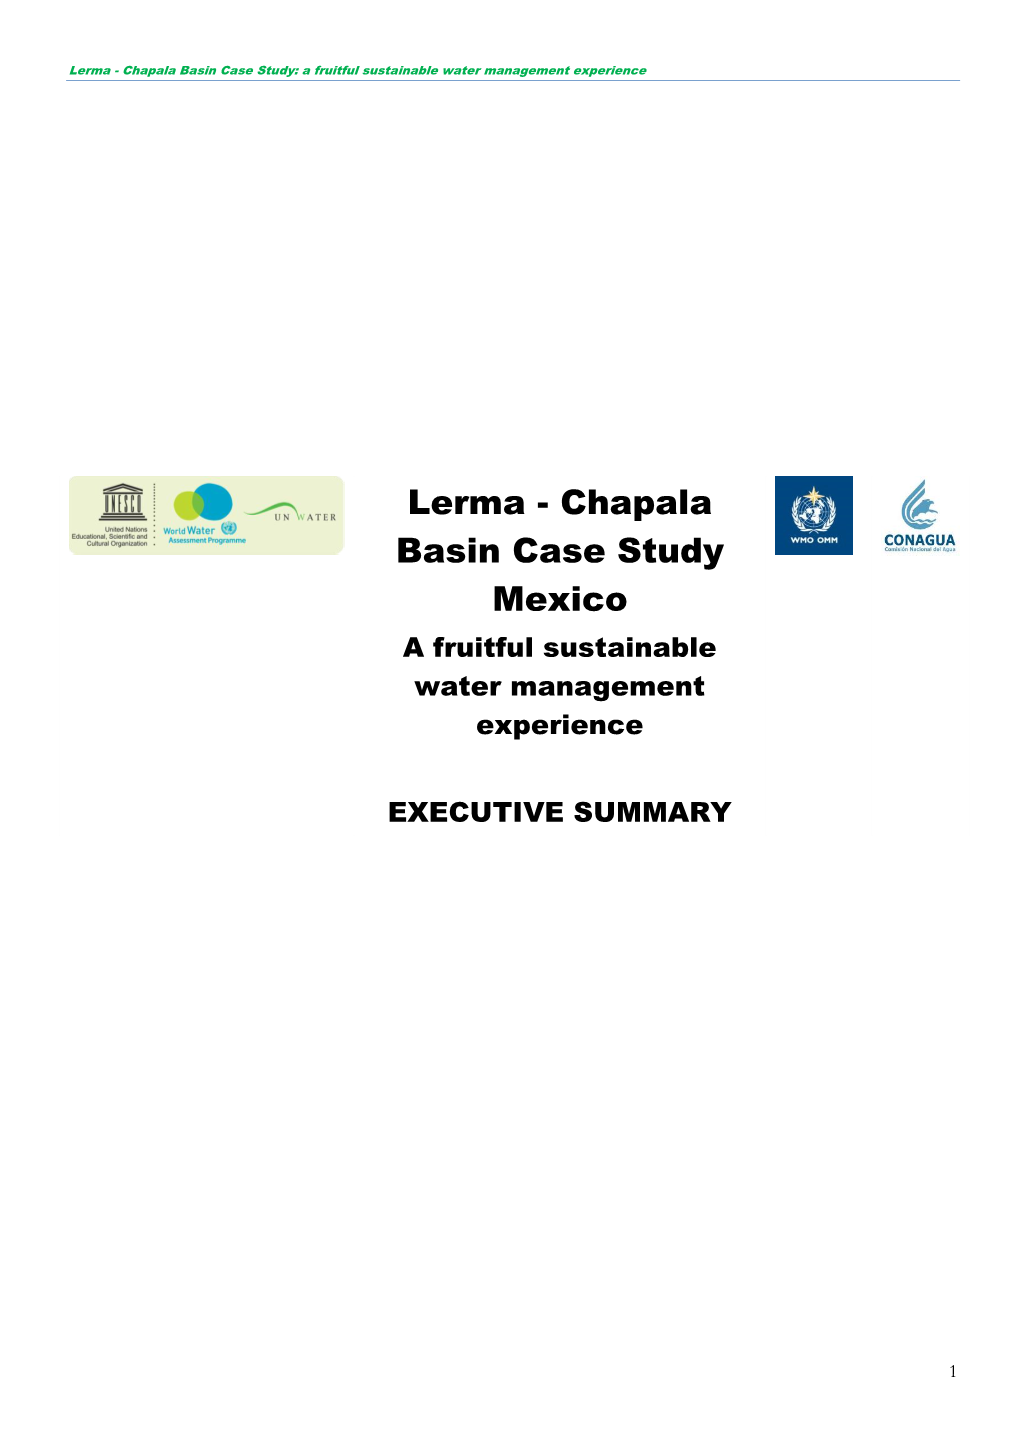 Lerma - Chapala Basin Case Study: a Fruitful Sustainable Water Management Experience